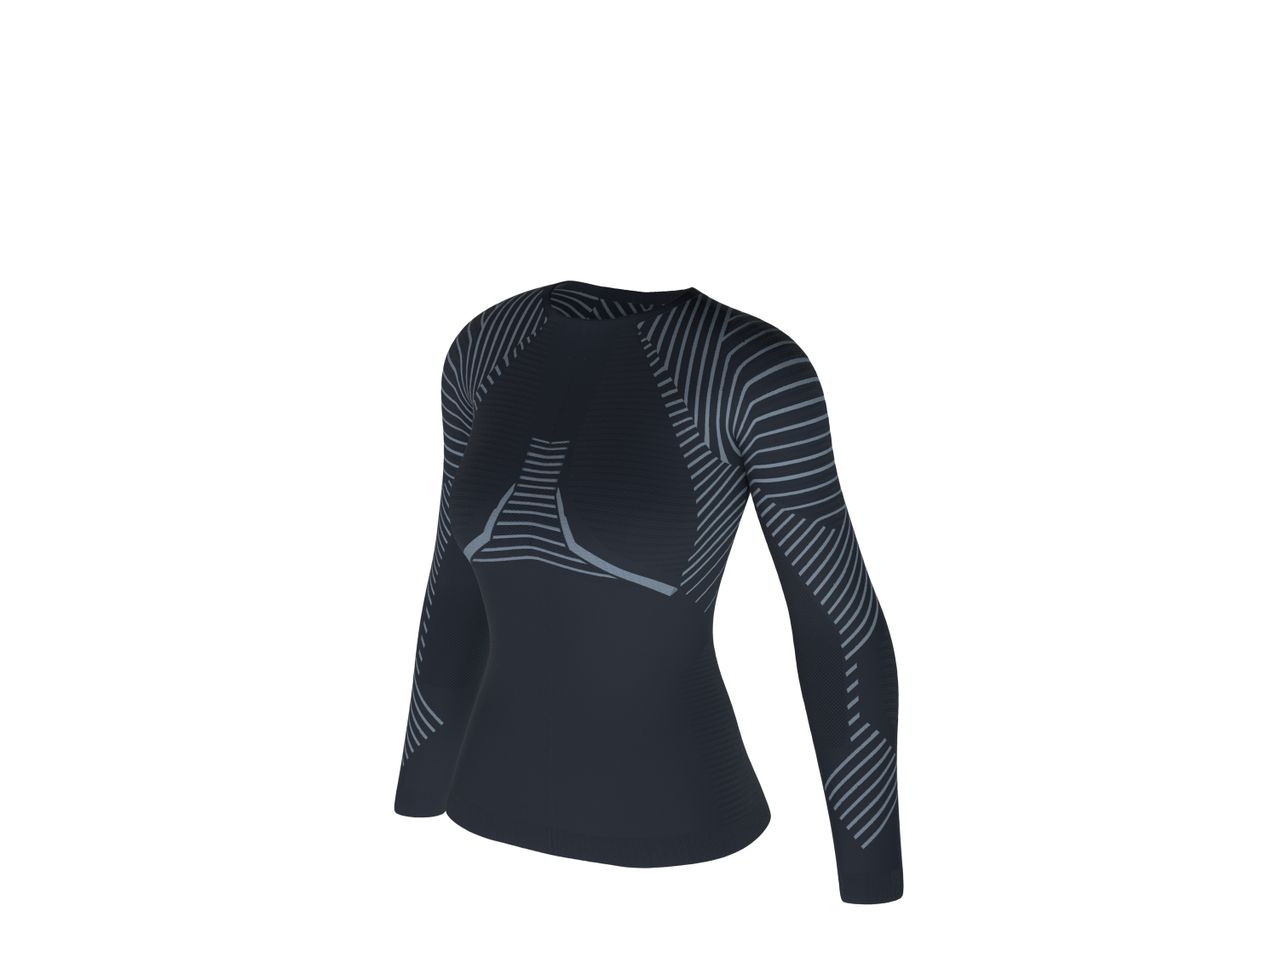 Go to full screen view: Ladies' Base Layer Top - Image 1